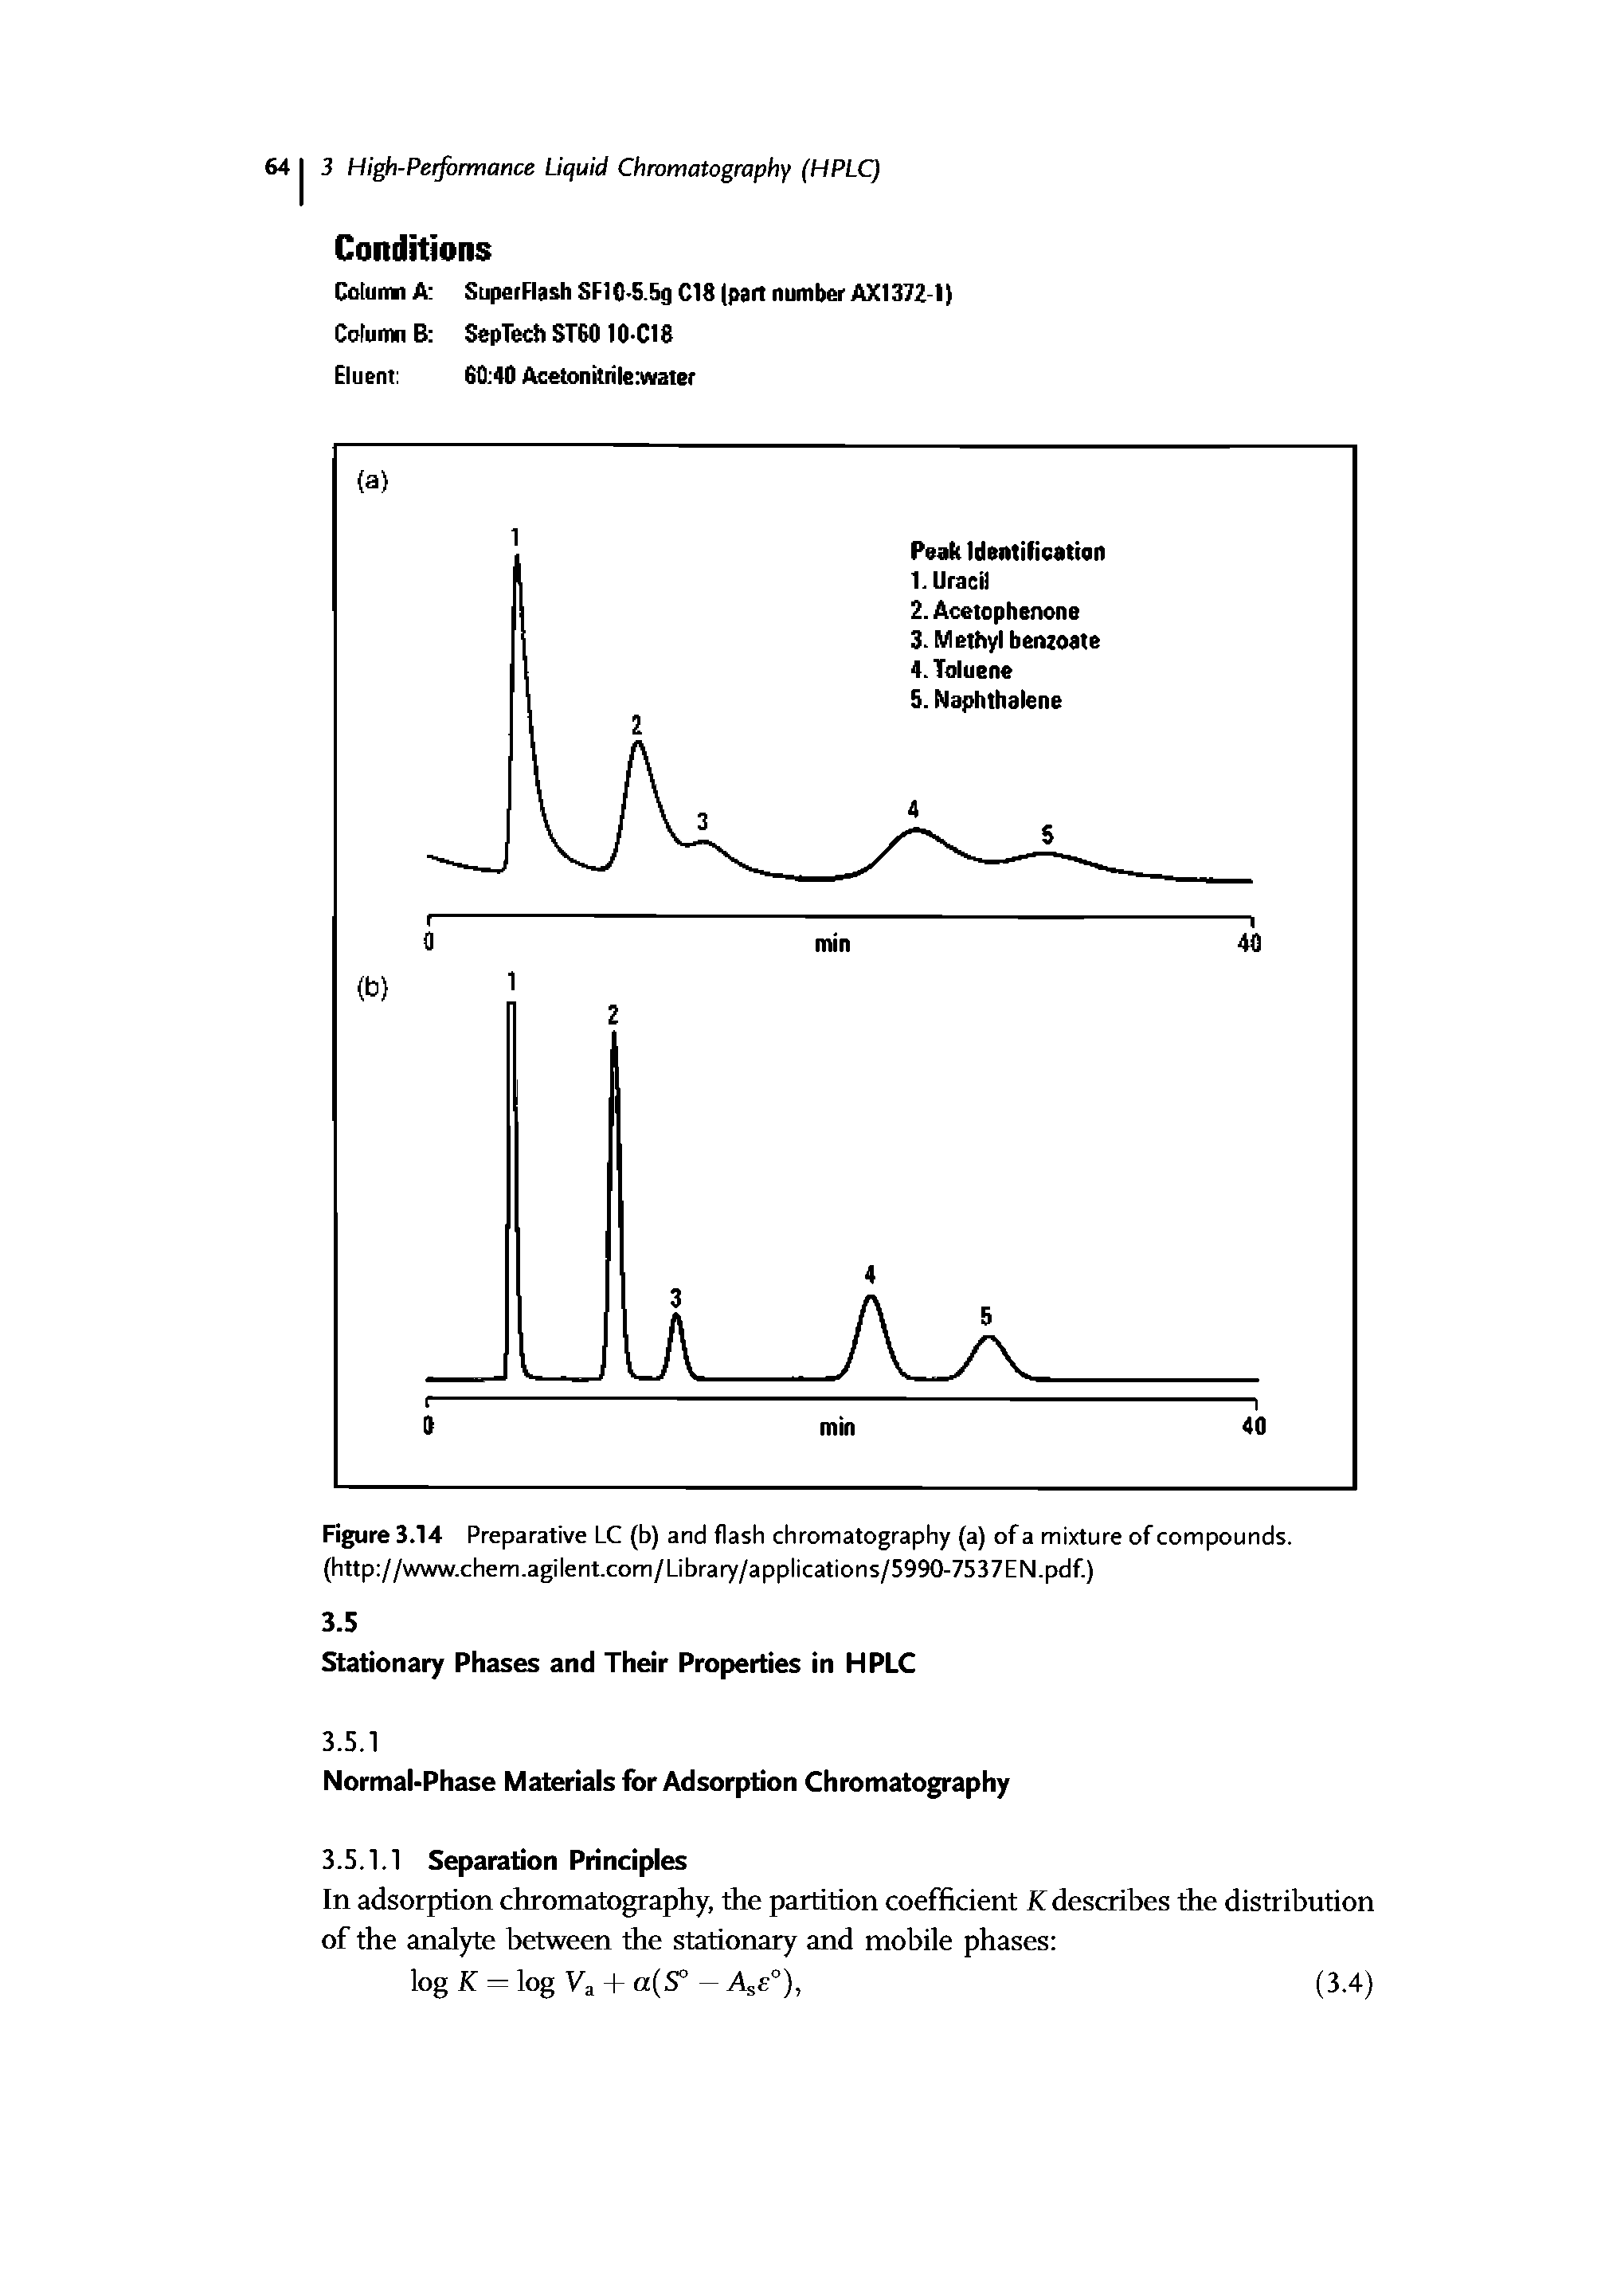 Figure 3.14 Preparative LC (b) and flash chromatography (a) of a mixture of compounds. (http //www.chem.agilent.com/Library/applications/5990-7537EN.pdf)...